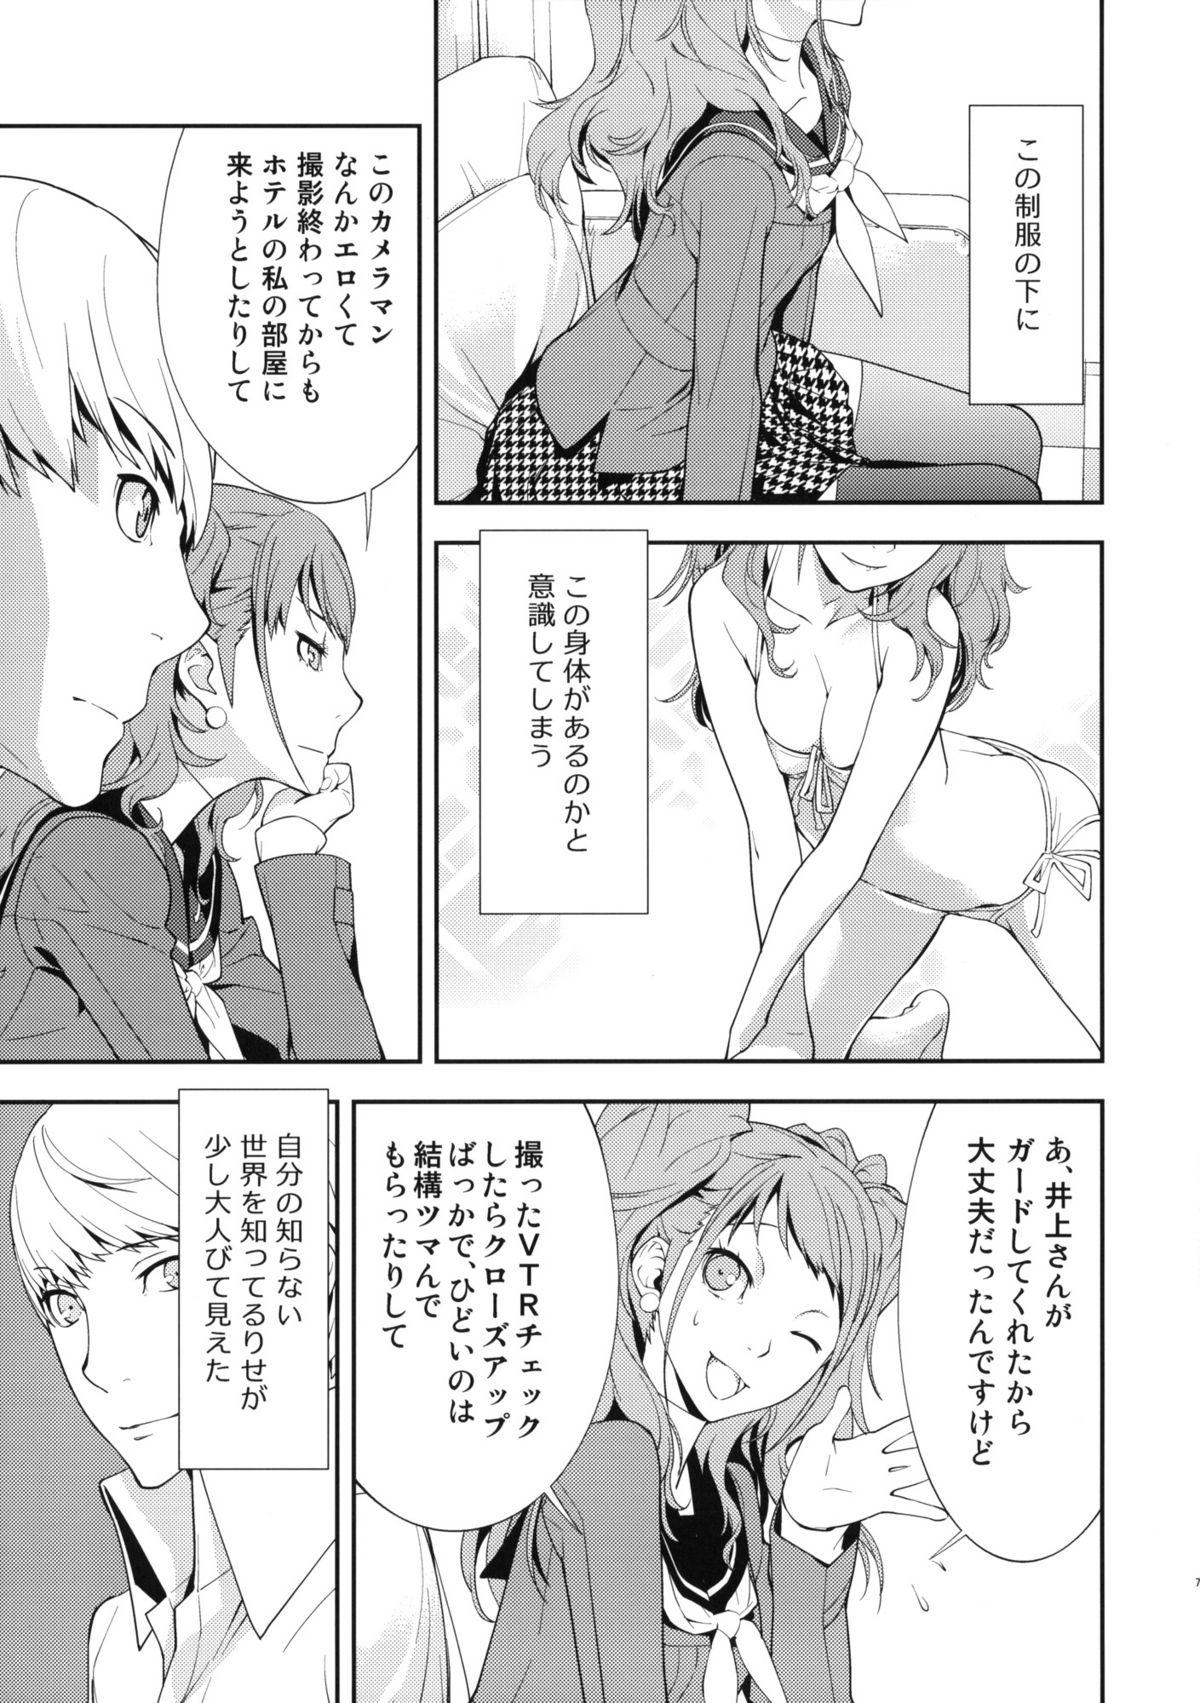 Caliente Rise Sexualis - Persona 4 Arabe - Page 8